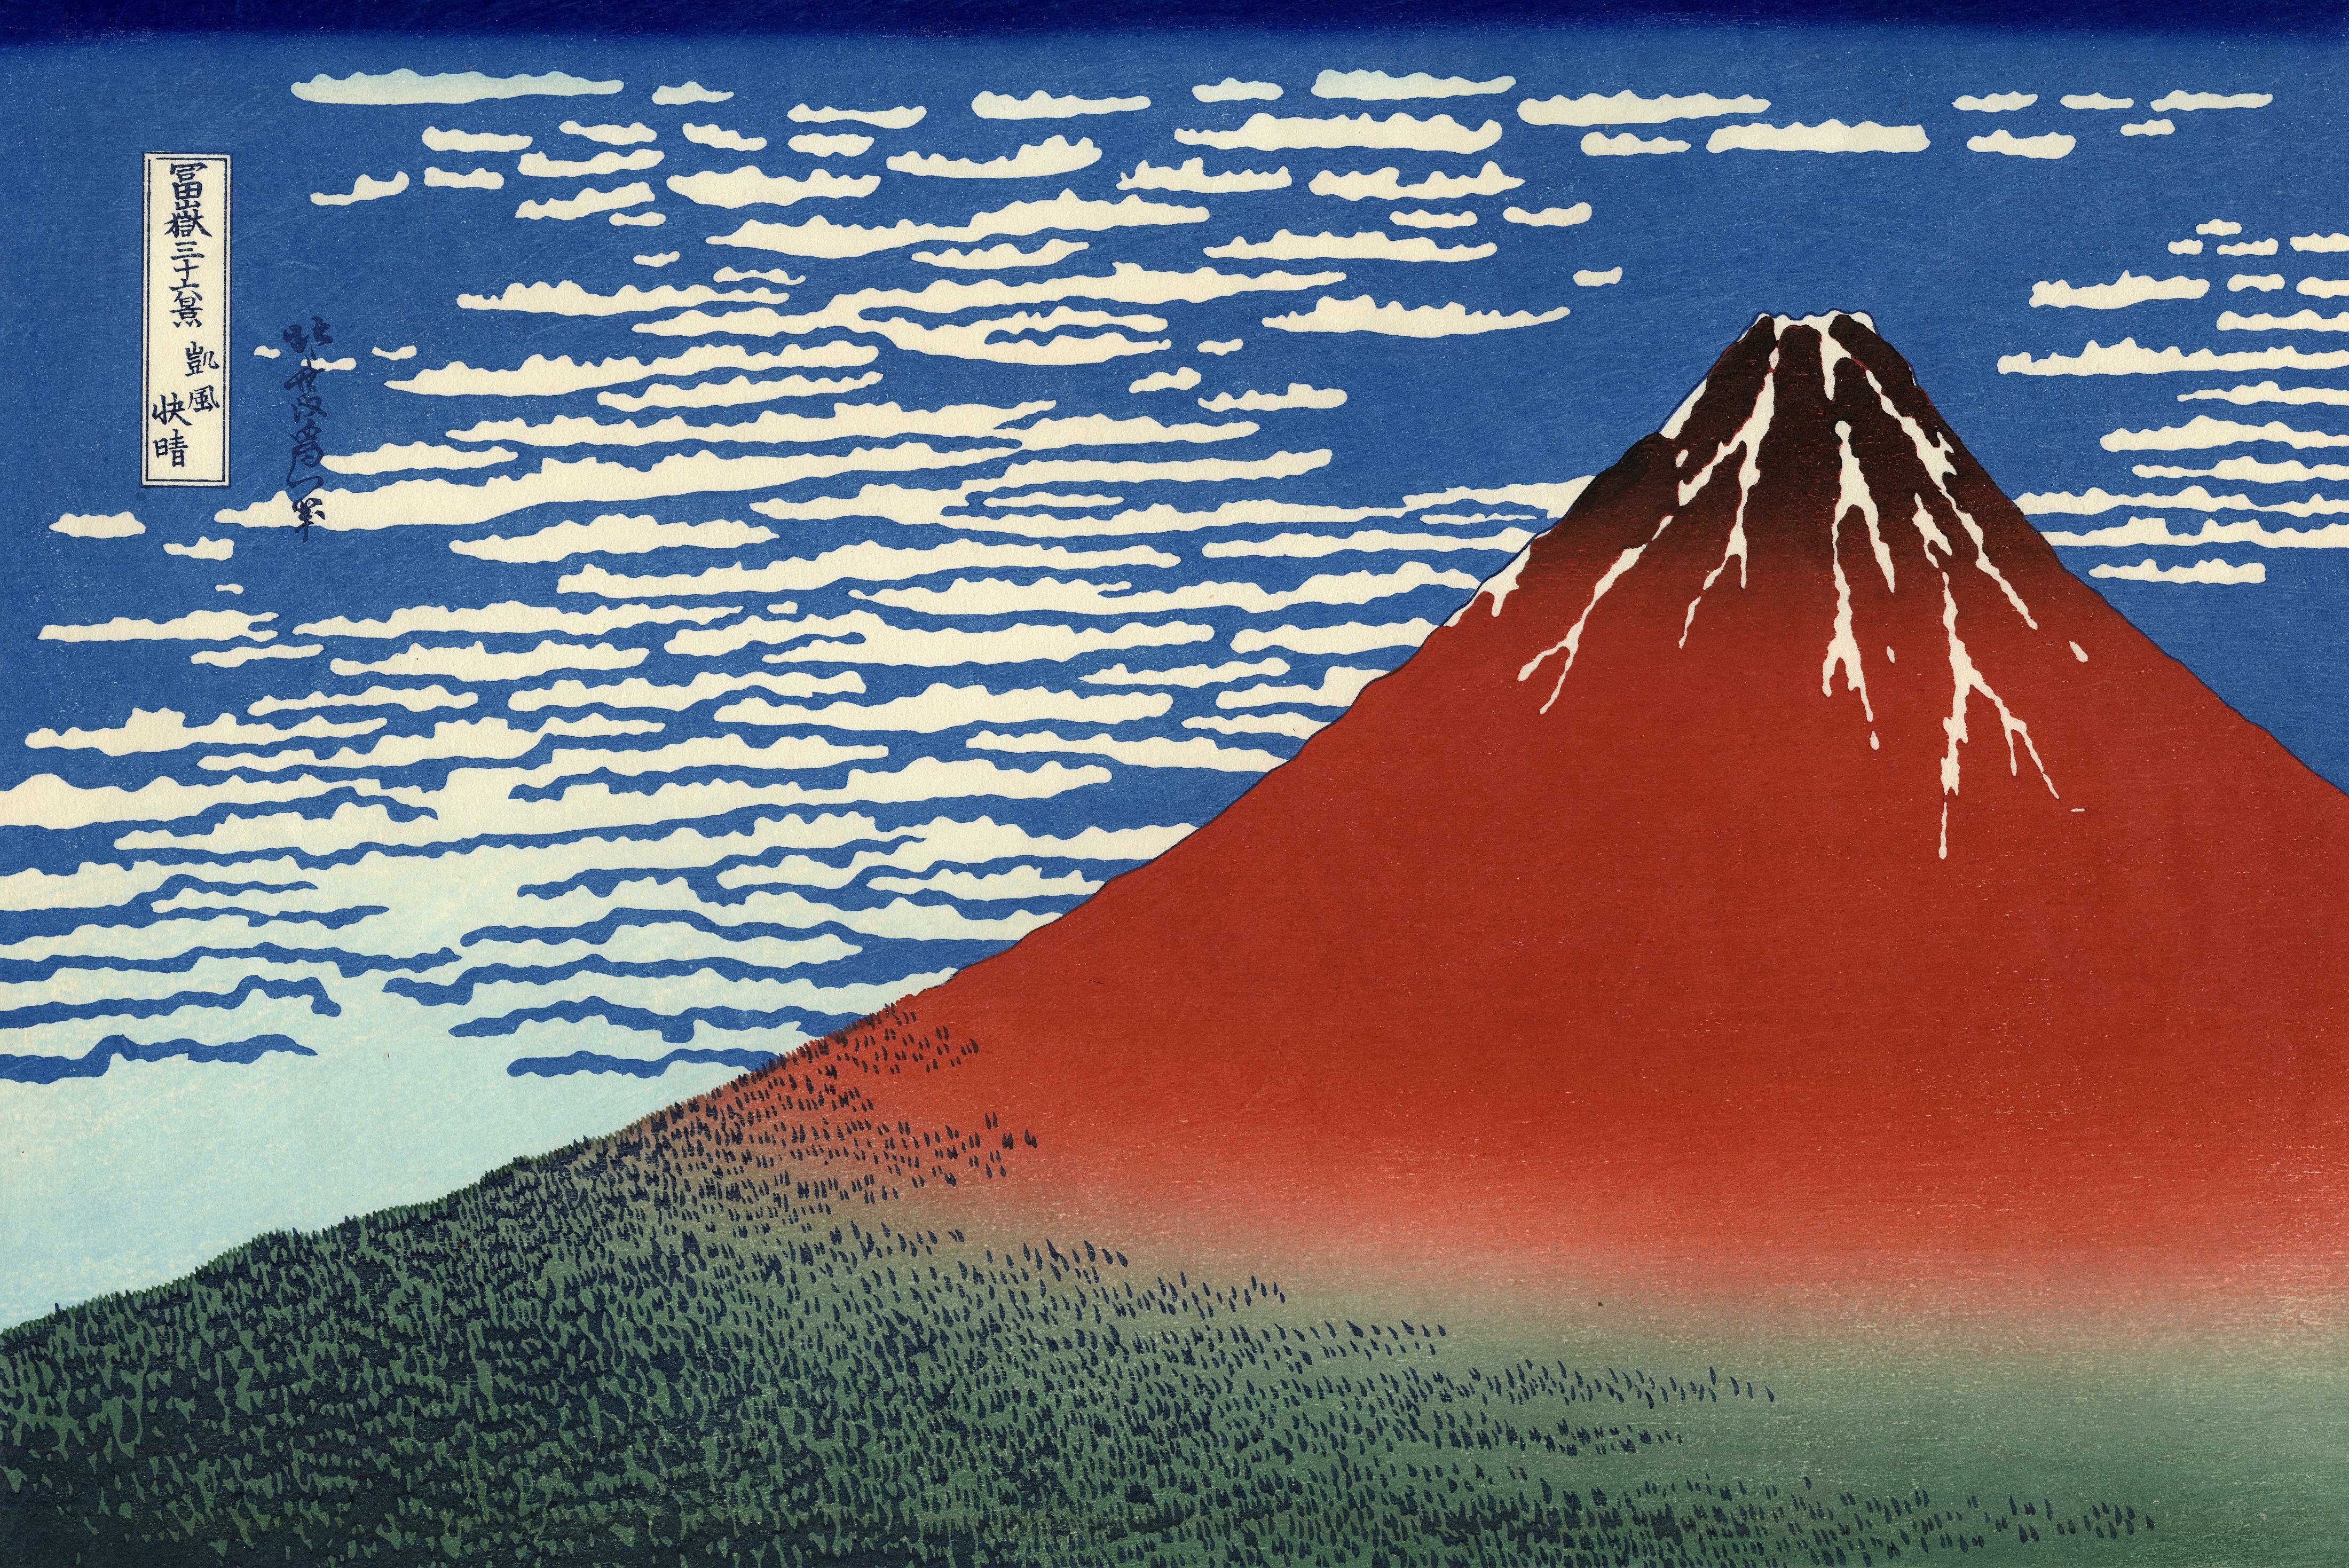 Fuji, Mountains in clear Weather (Red Fuji) by Katsushika Hokusai - 1831 - - private collection